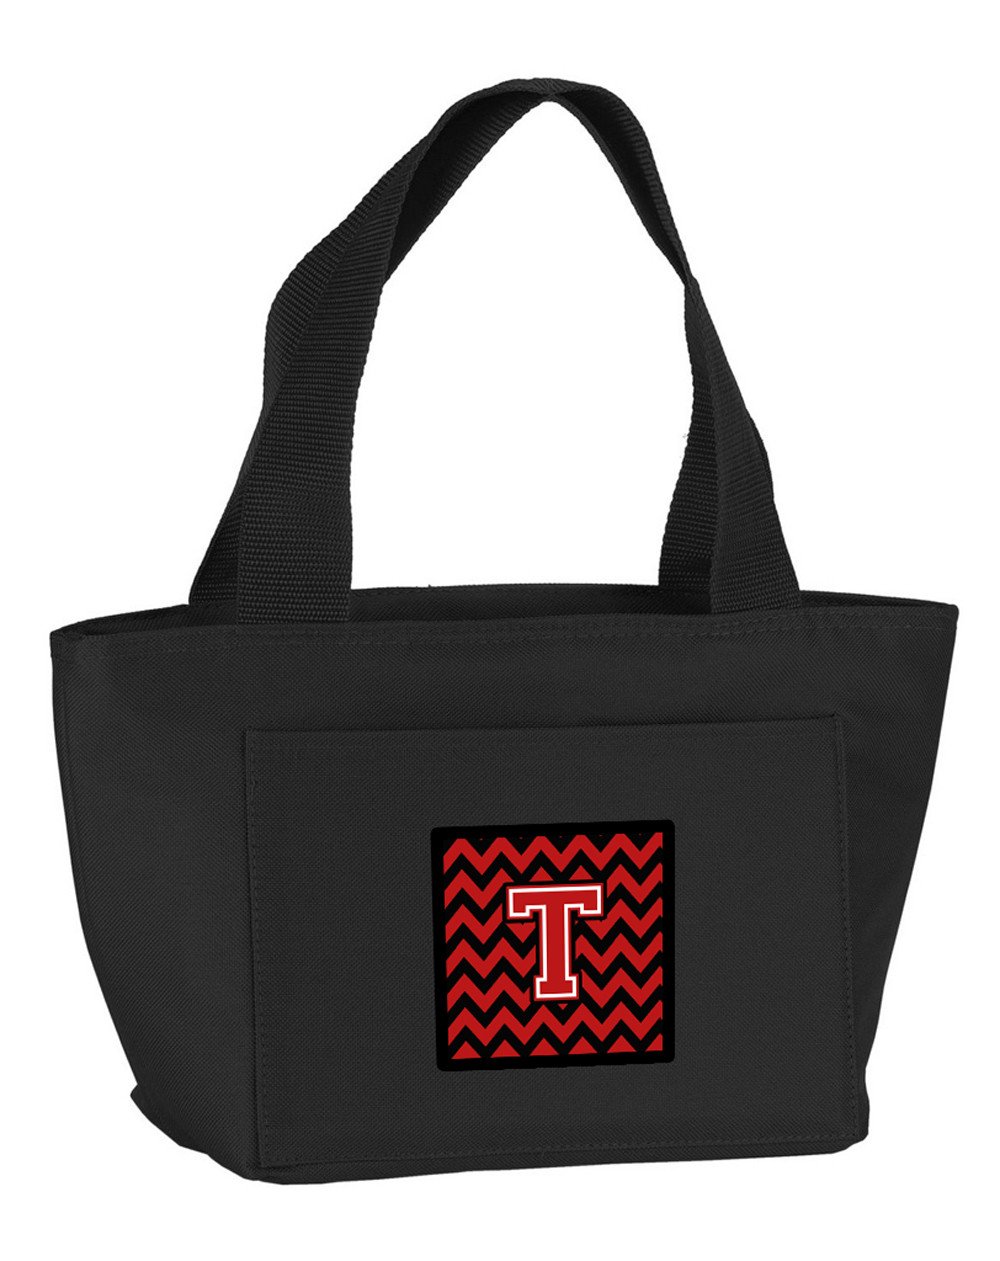 Letter T Chevron Black and Red   Lunch Bag CJ1047-TBK-8808 by Caroline&#39;s Treasures